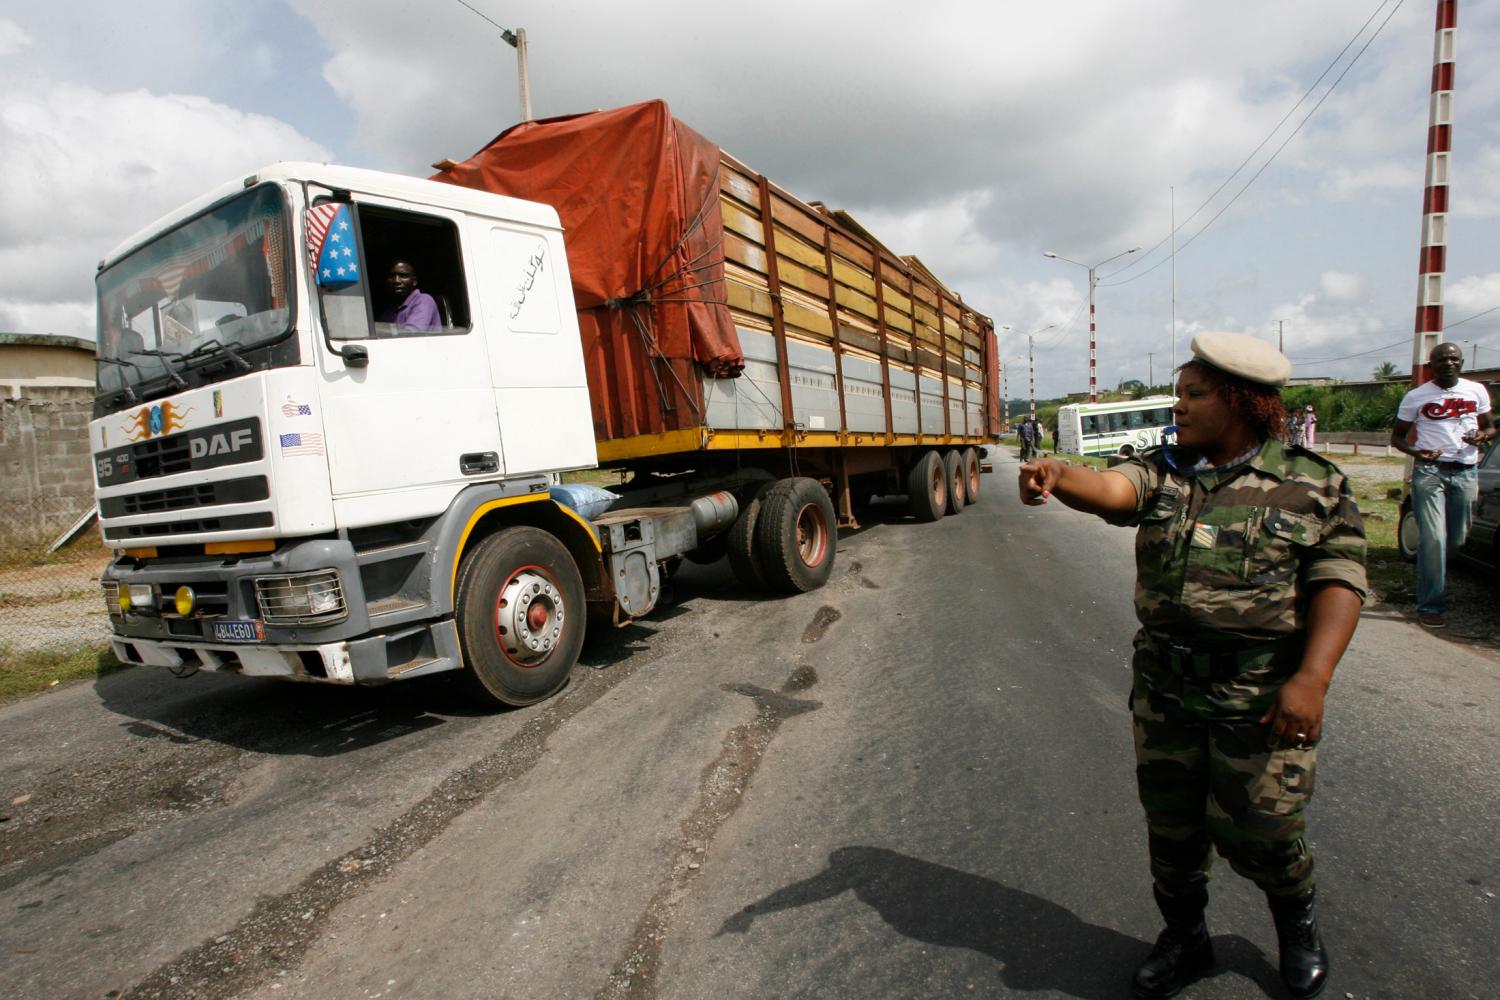 A customs officer redirects a truck at the Yopougon checkpoint in Abidjan June 2, 2008. Ivory Coast authorities recently launched a campaign to crack down on racketeering on the roads and improve traffic.   REUTERS/Luc Gnago (IVORY COAST)